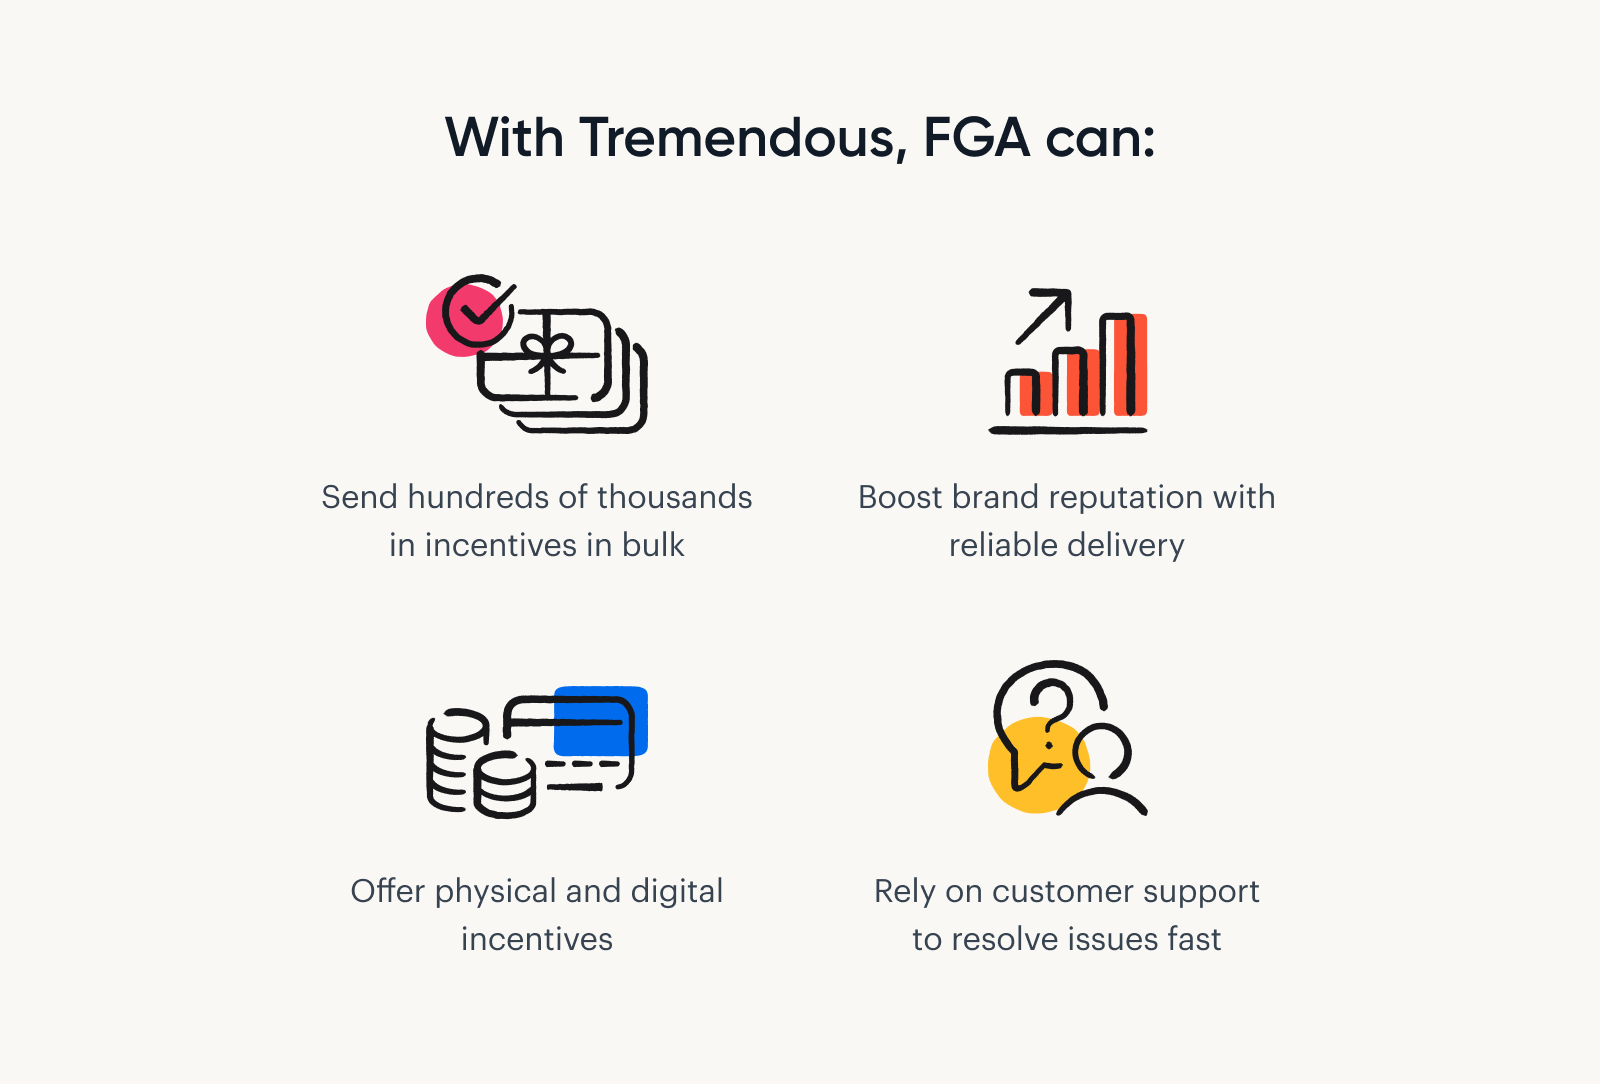 With Tremendous, FGA can send hundreds of thousands of incentives in bulk, boost brand reputation, and offer physical and digital incentives.